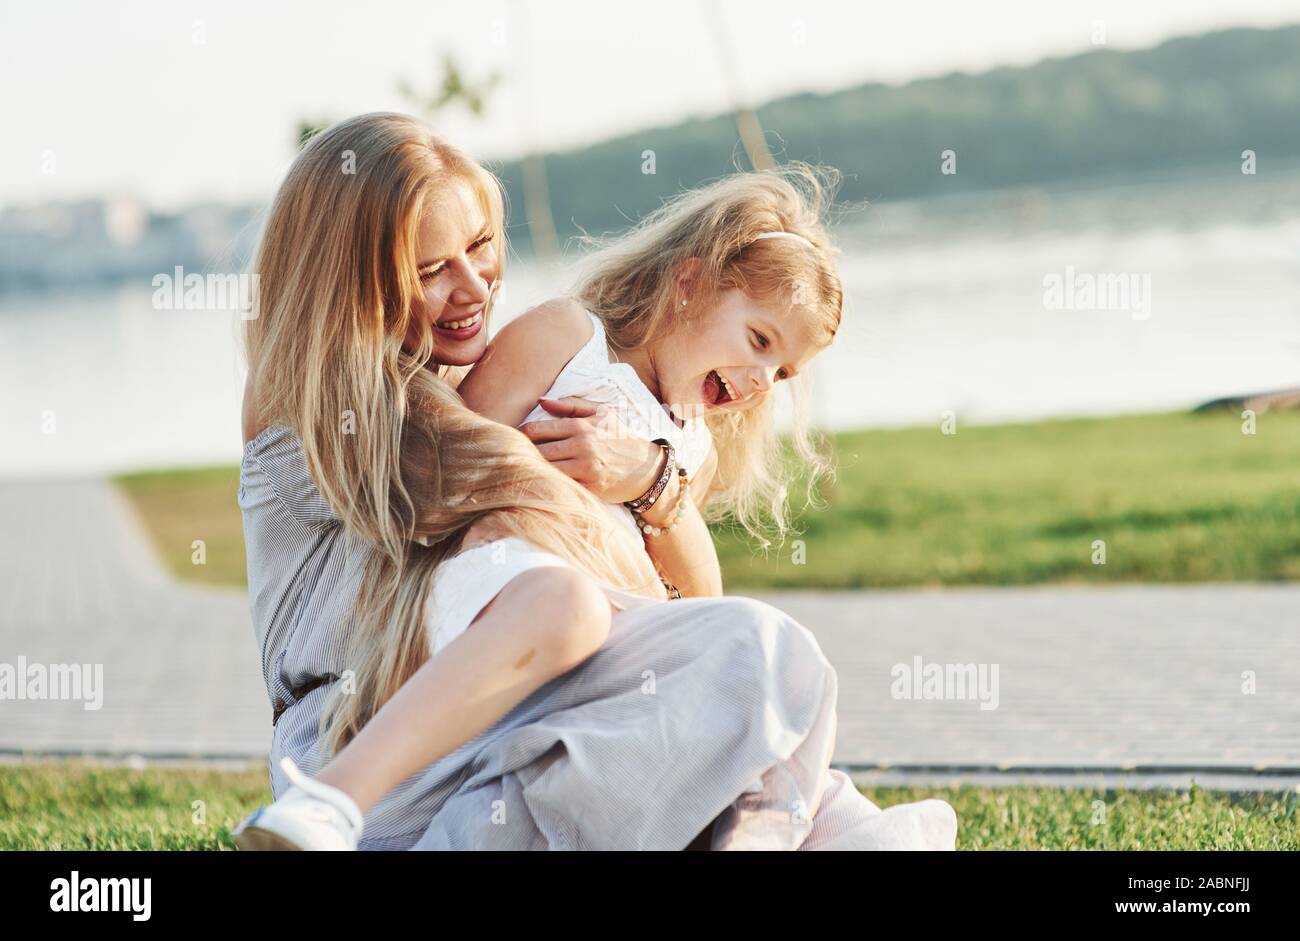 Pure love. Photo of young mother and her daughter having good time on the green grass with lake at background Stock Photo